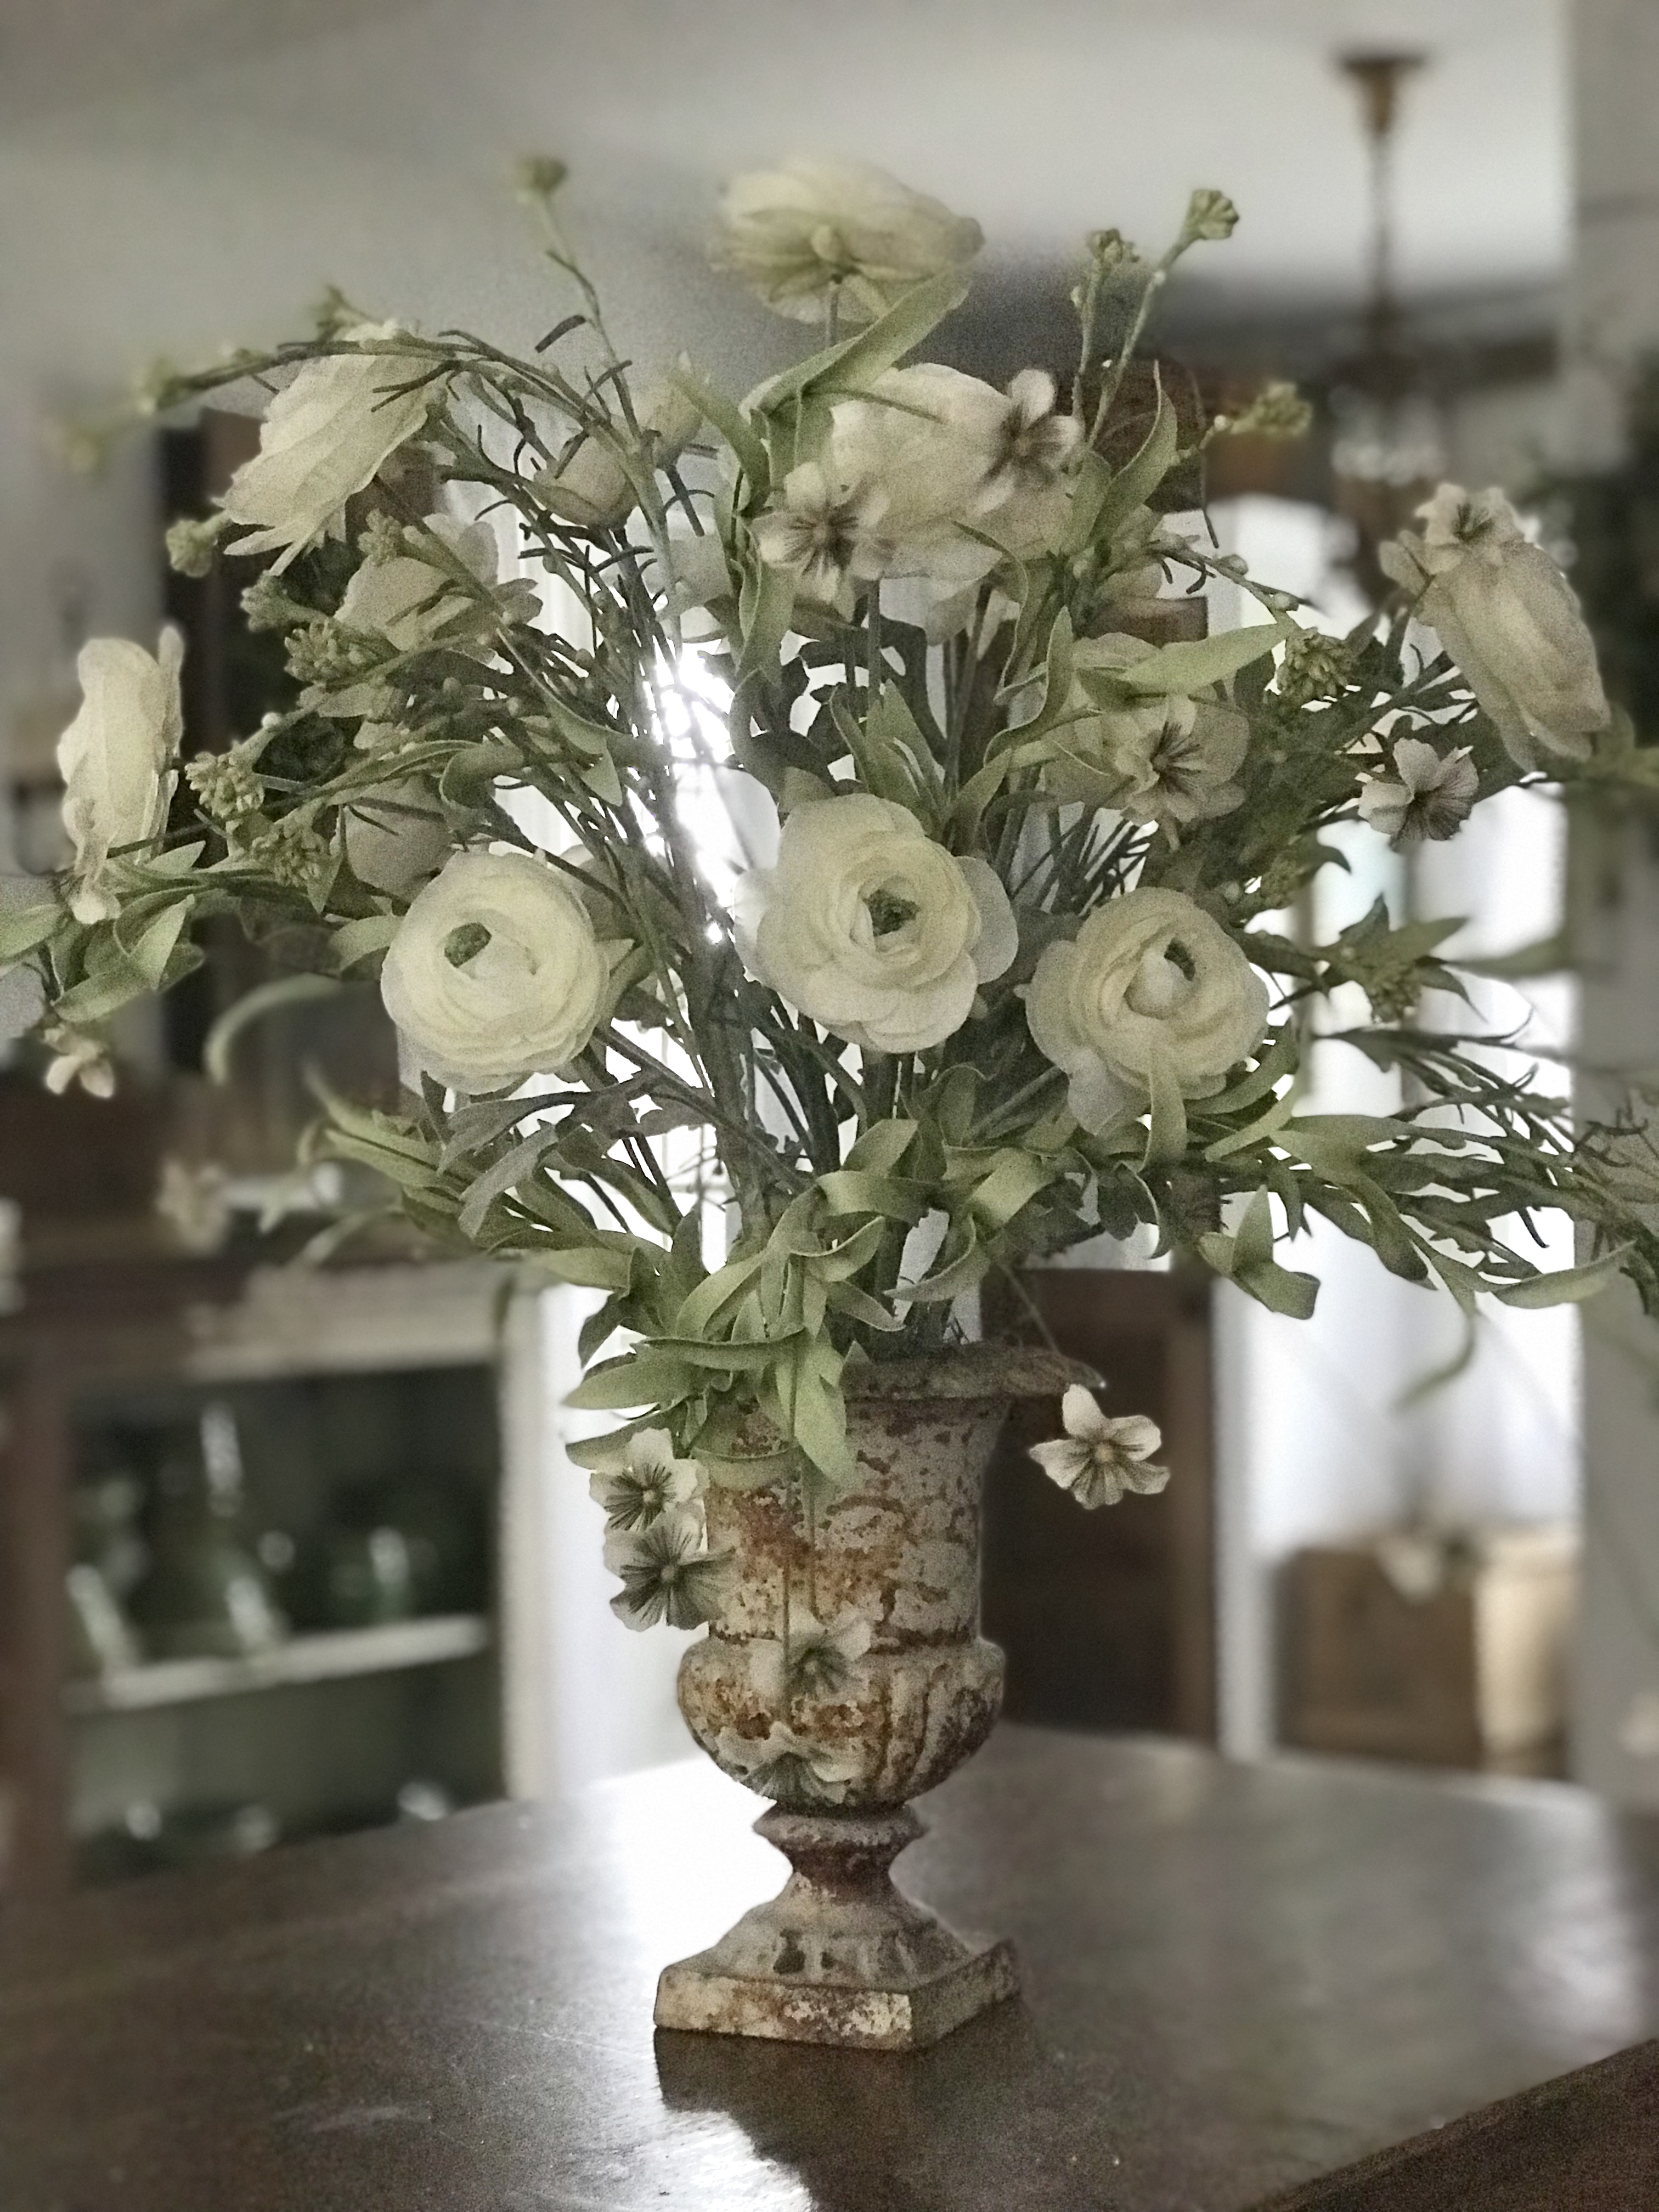 How To Make A Simple Artificial Flower Arrangement Deb And Danelle